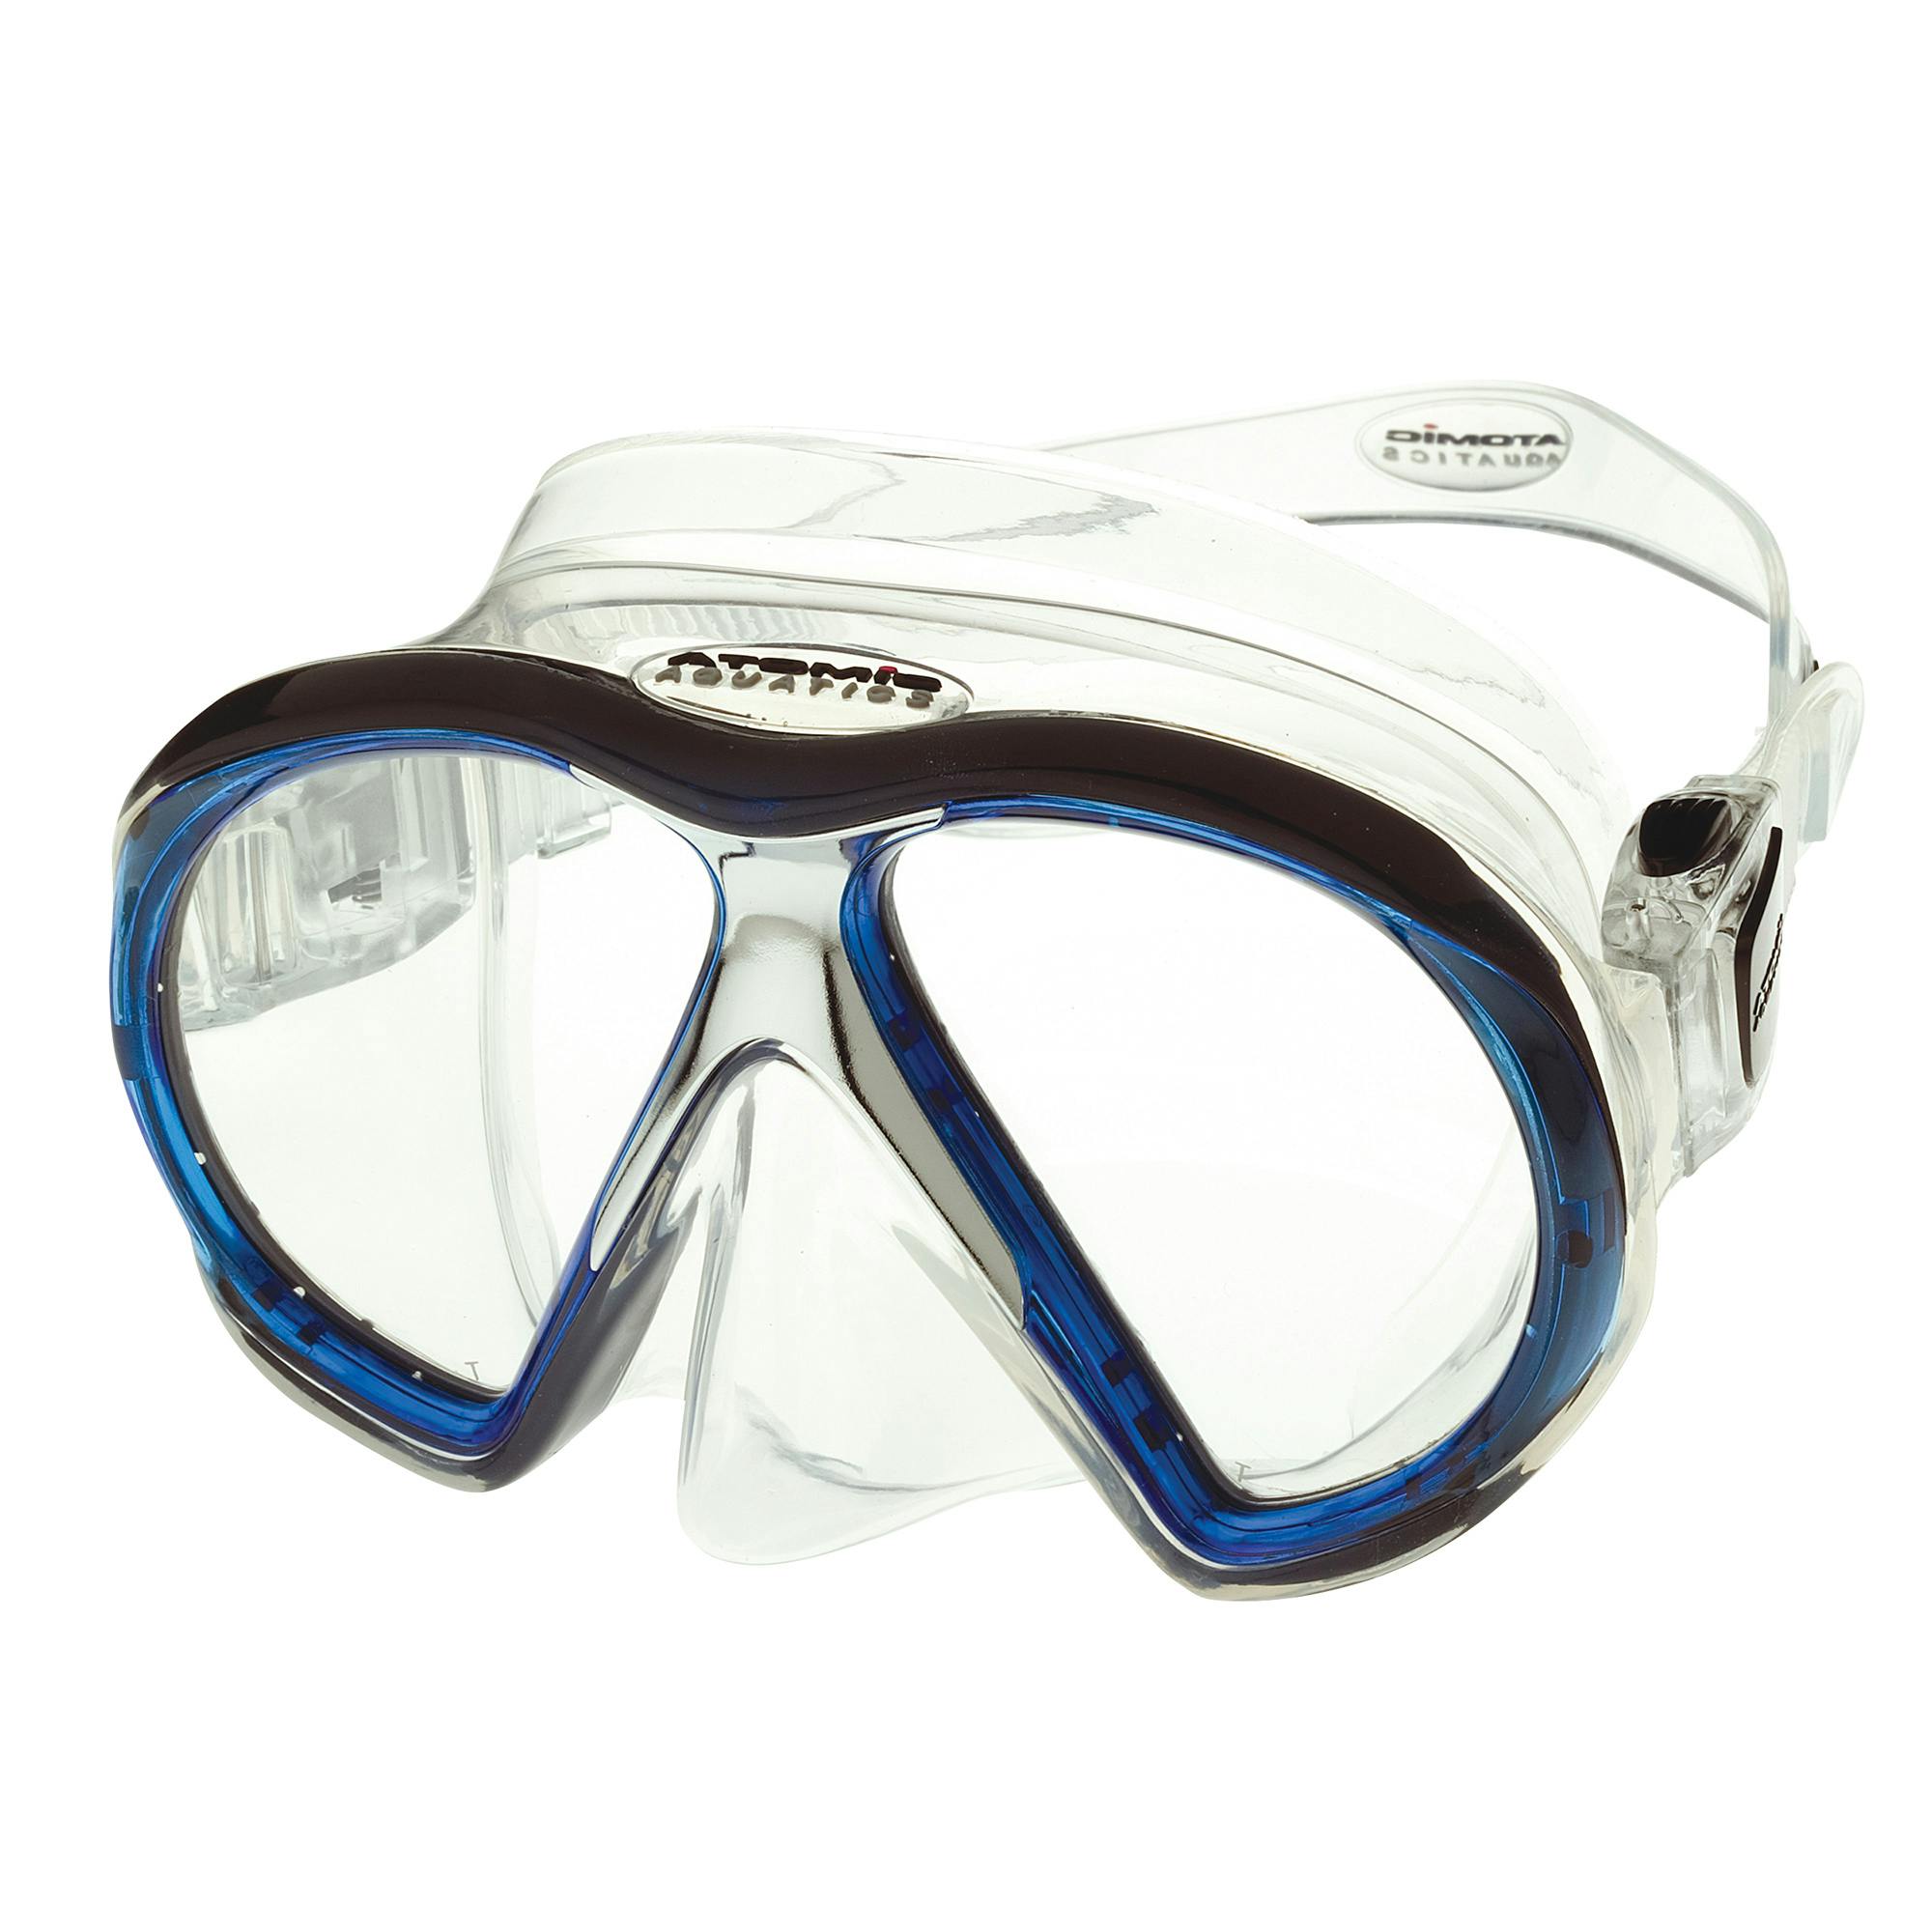 Atomic SubFrame Mask, Two Lens (Medium Fit) - Clear/Blue